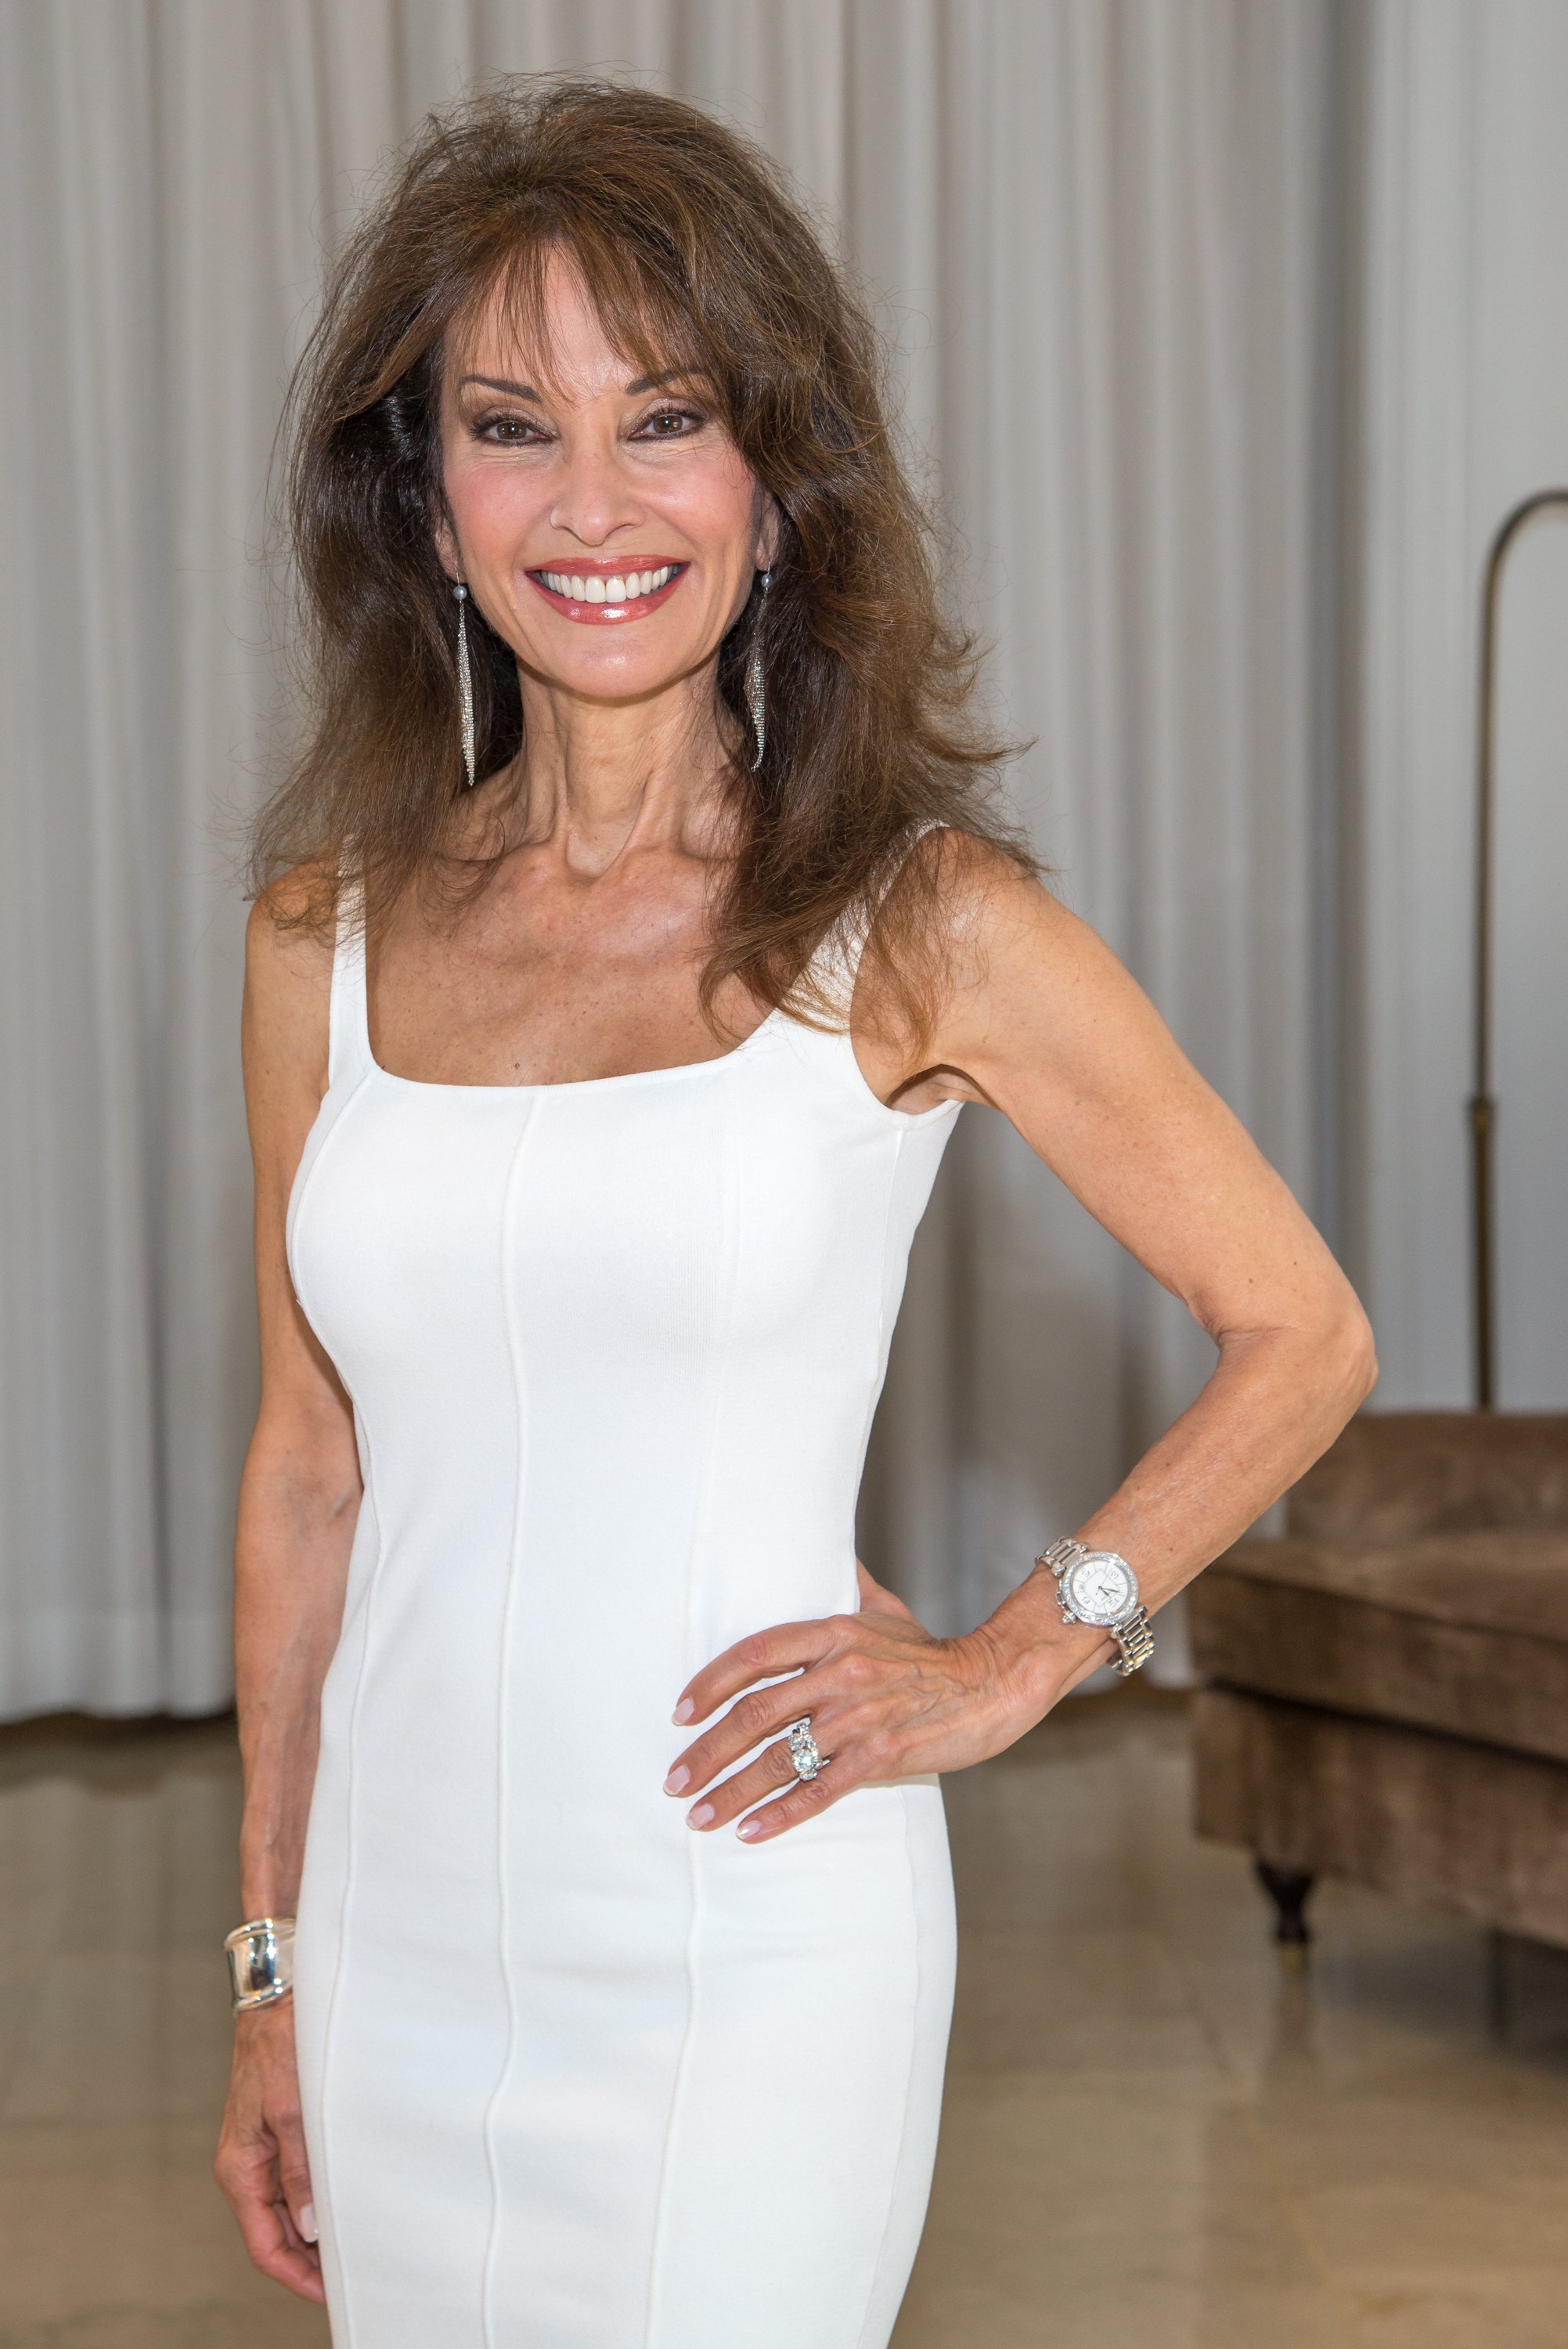 Susan Lucci Looks Youthful At 74 In A New Photo Wearing A Tight Hot Pink Dress